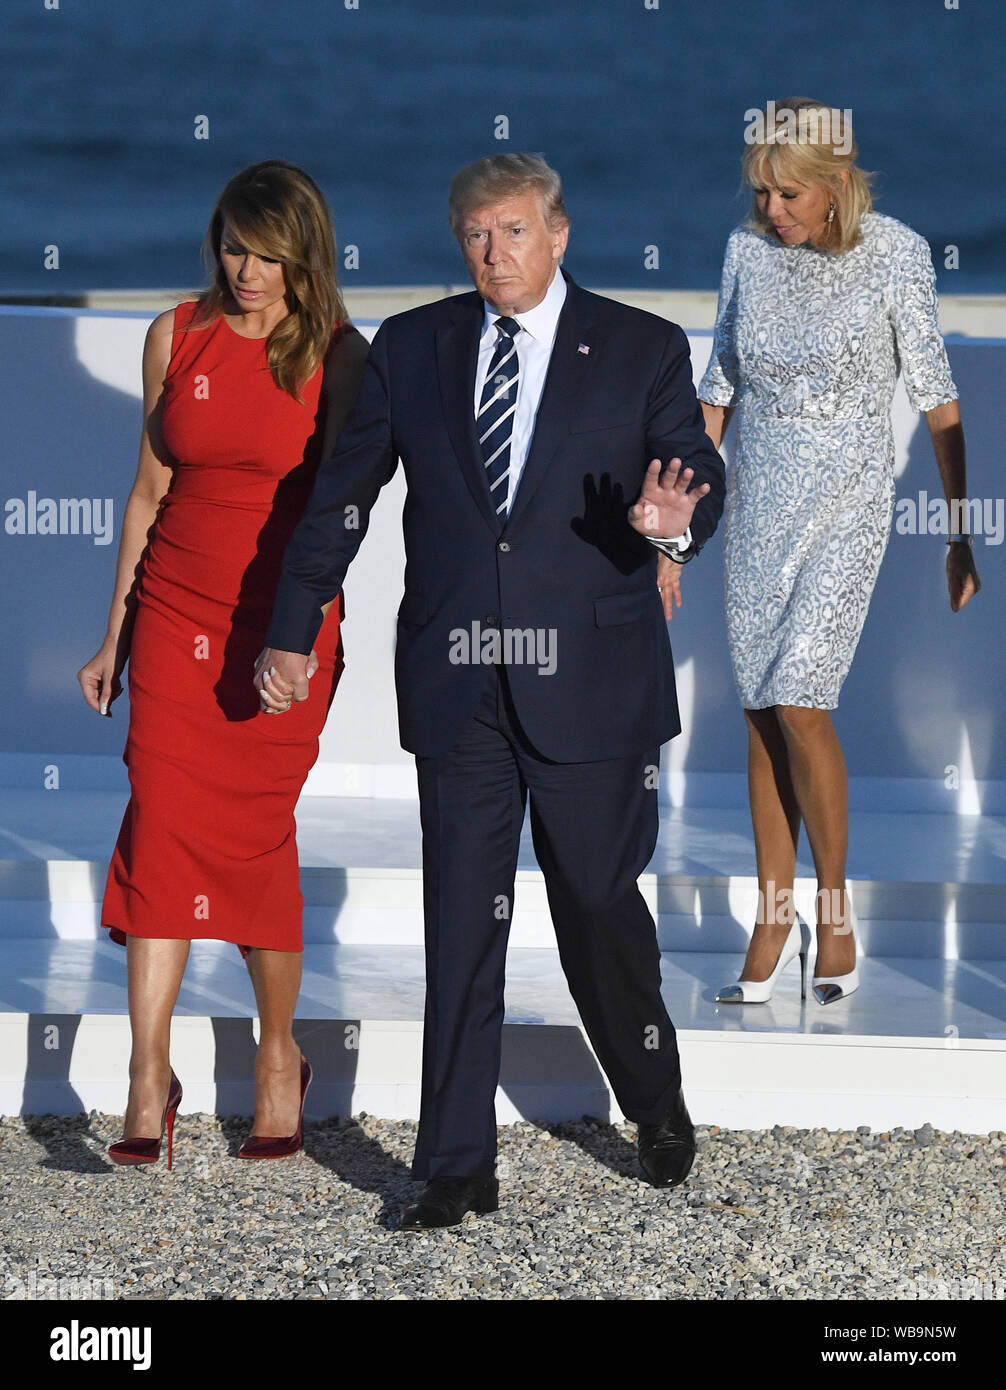 Melania Trump, left, President Donald Trump, Brigitte Macron, French President Emmanuel Macron join other World Leaders for the family photo at the G7 Summit in Biarritz, France. Stock Photo